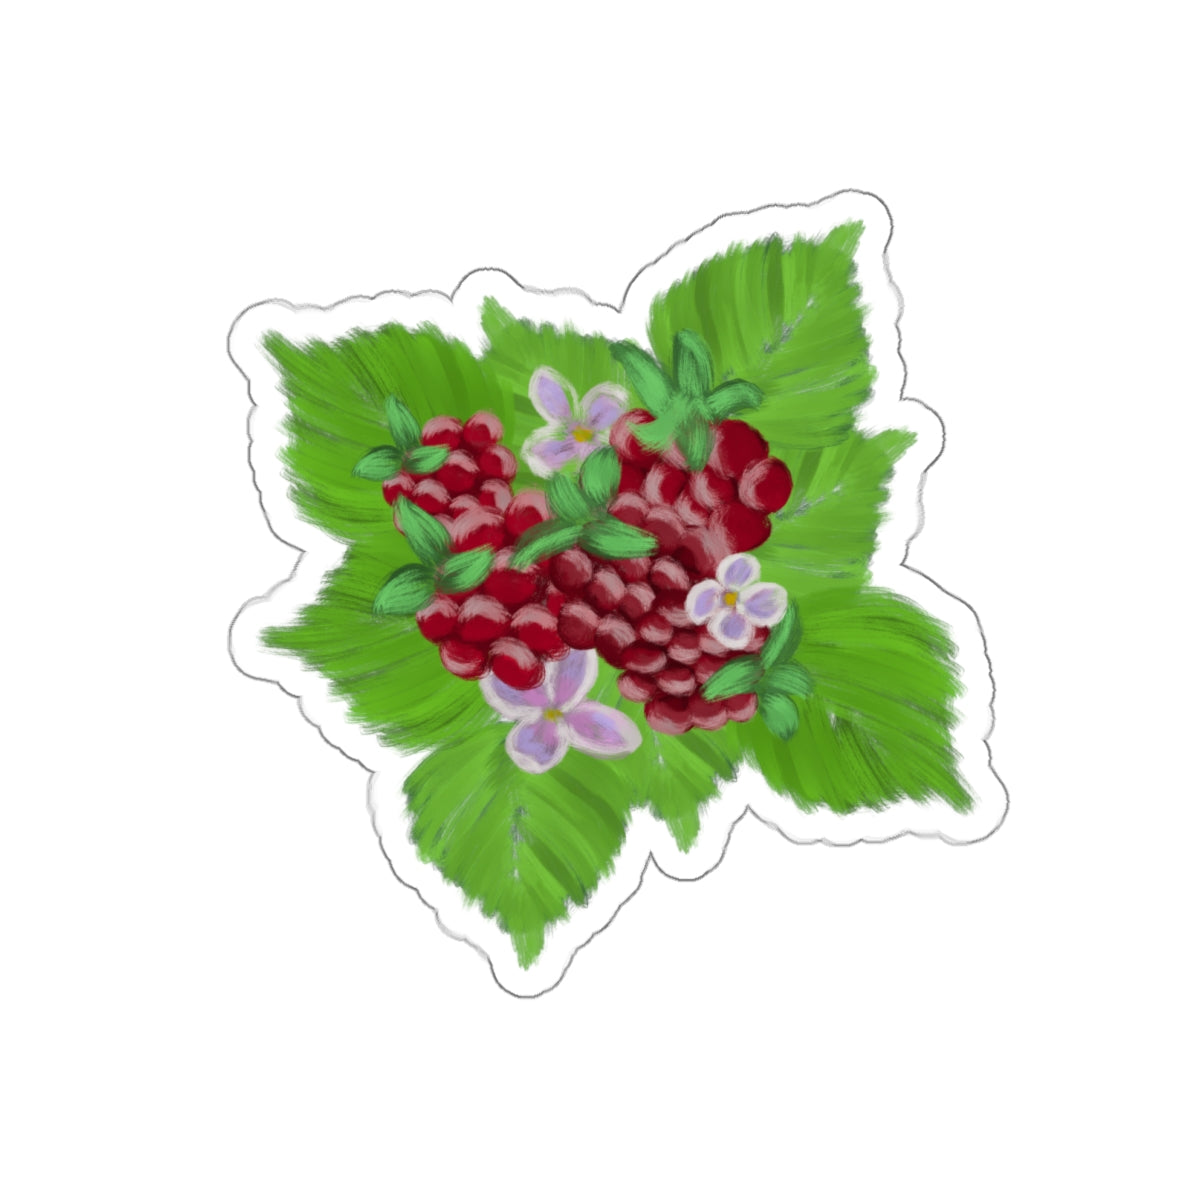 Raspberry Patch - Raspberries with Leaves and Flowers Die Cut Sticker